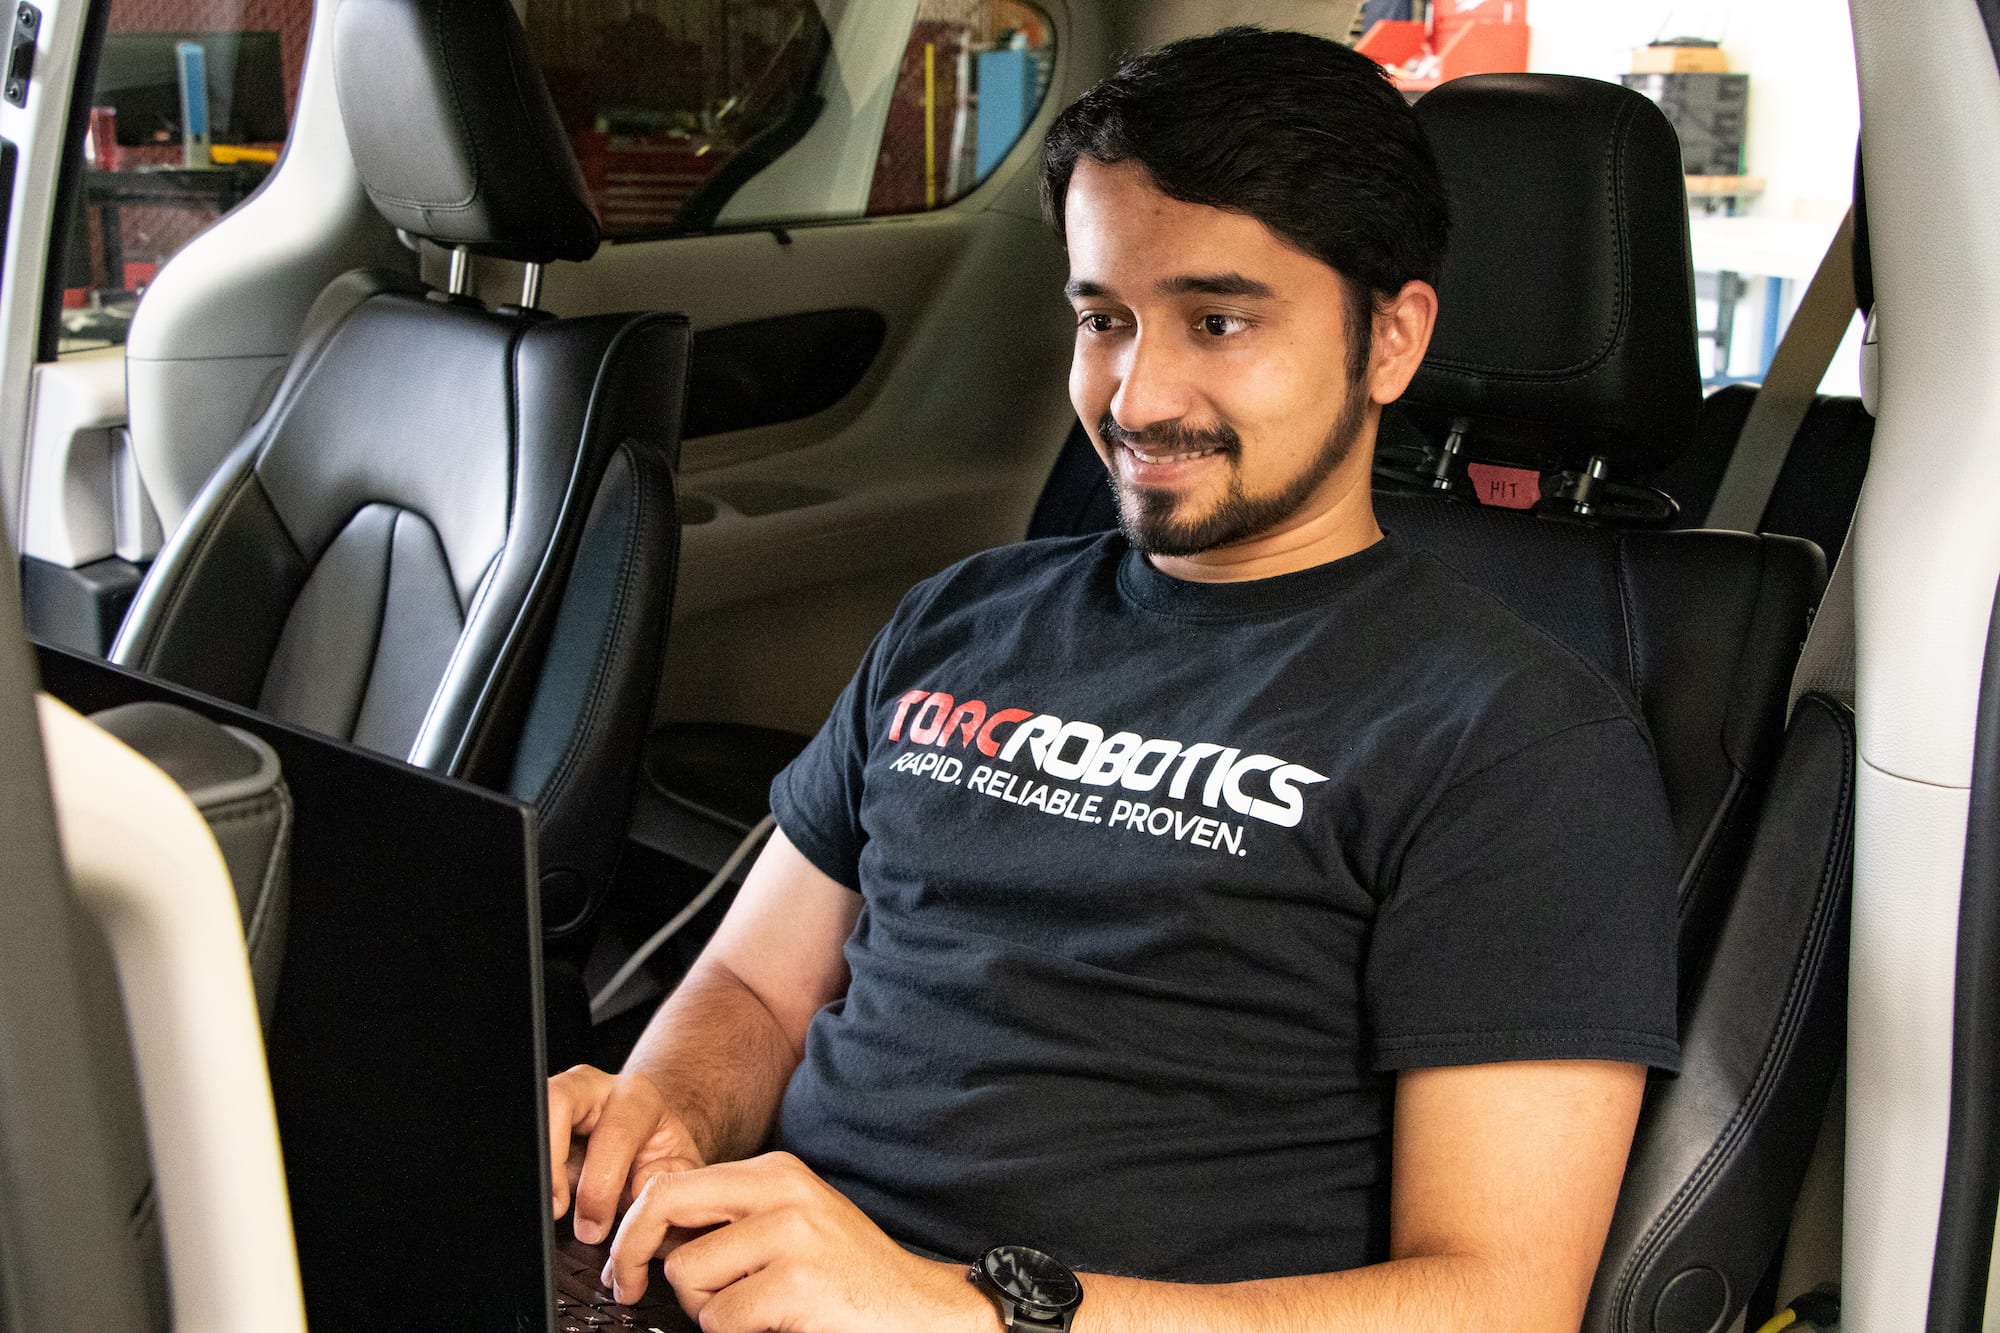 Software engineer working on computer in car